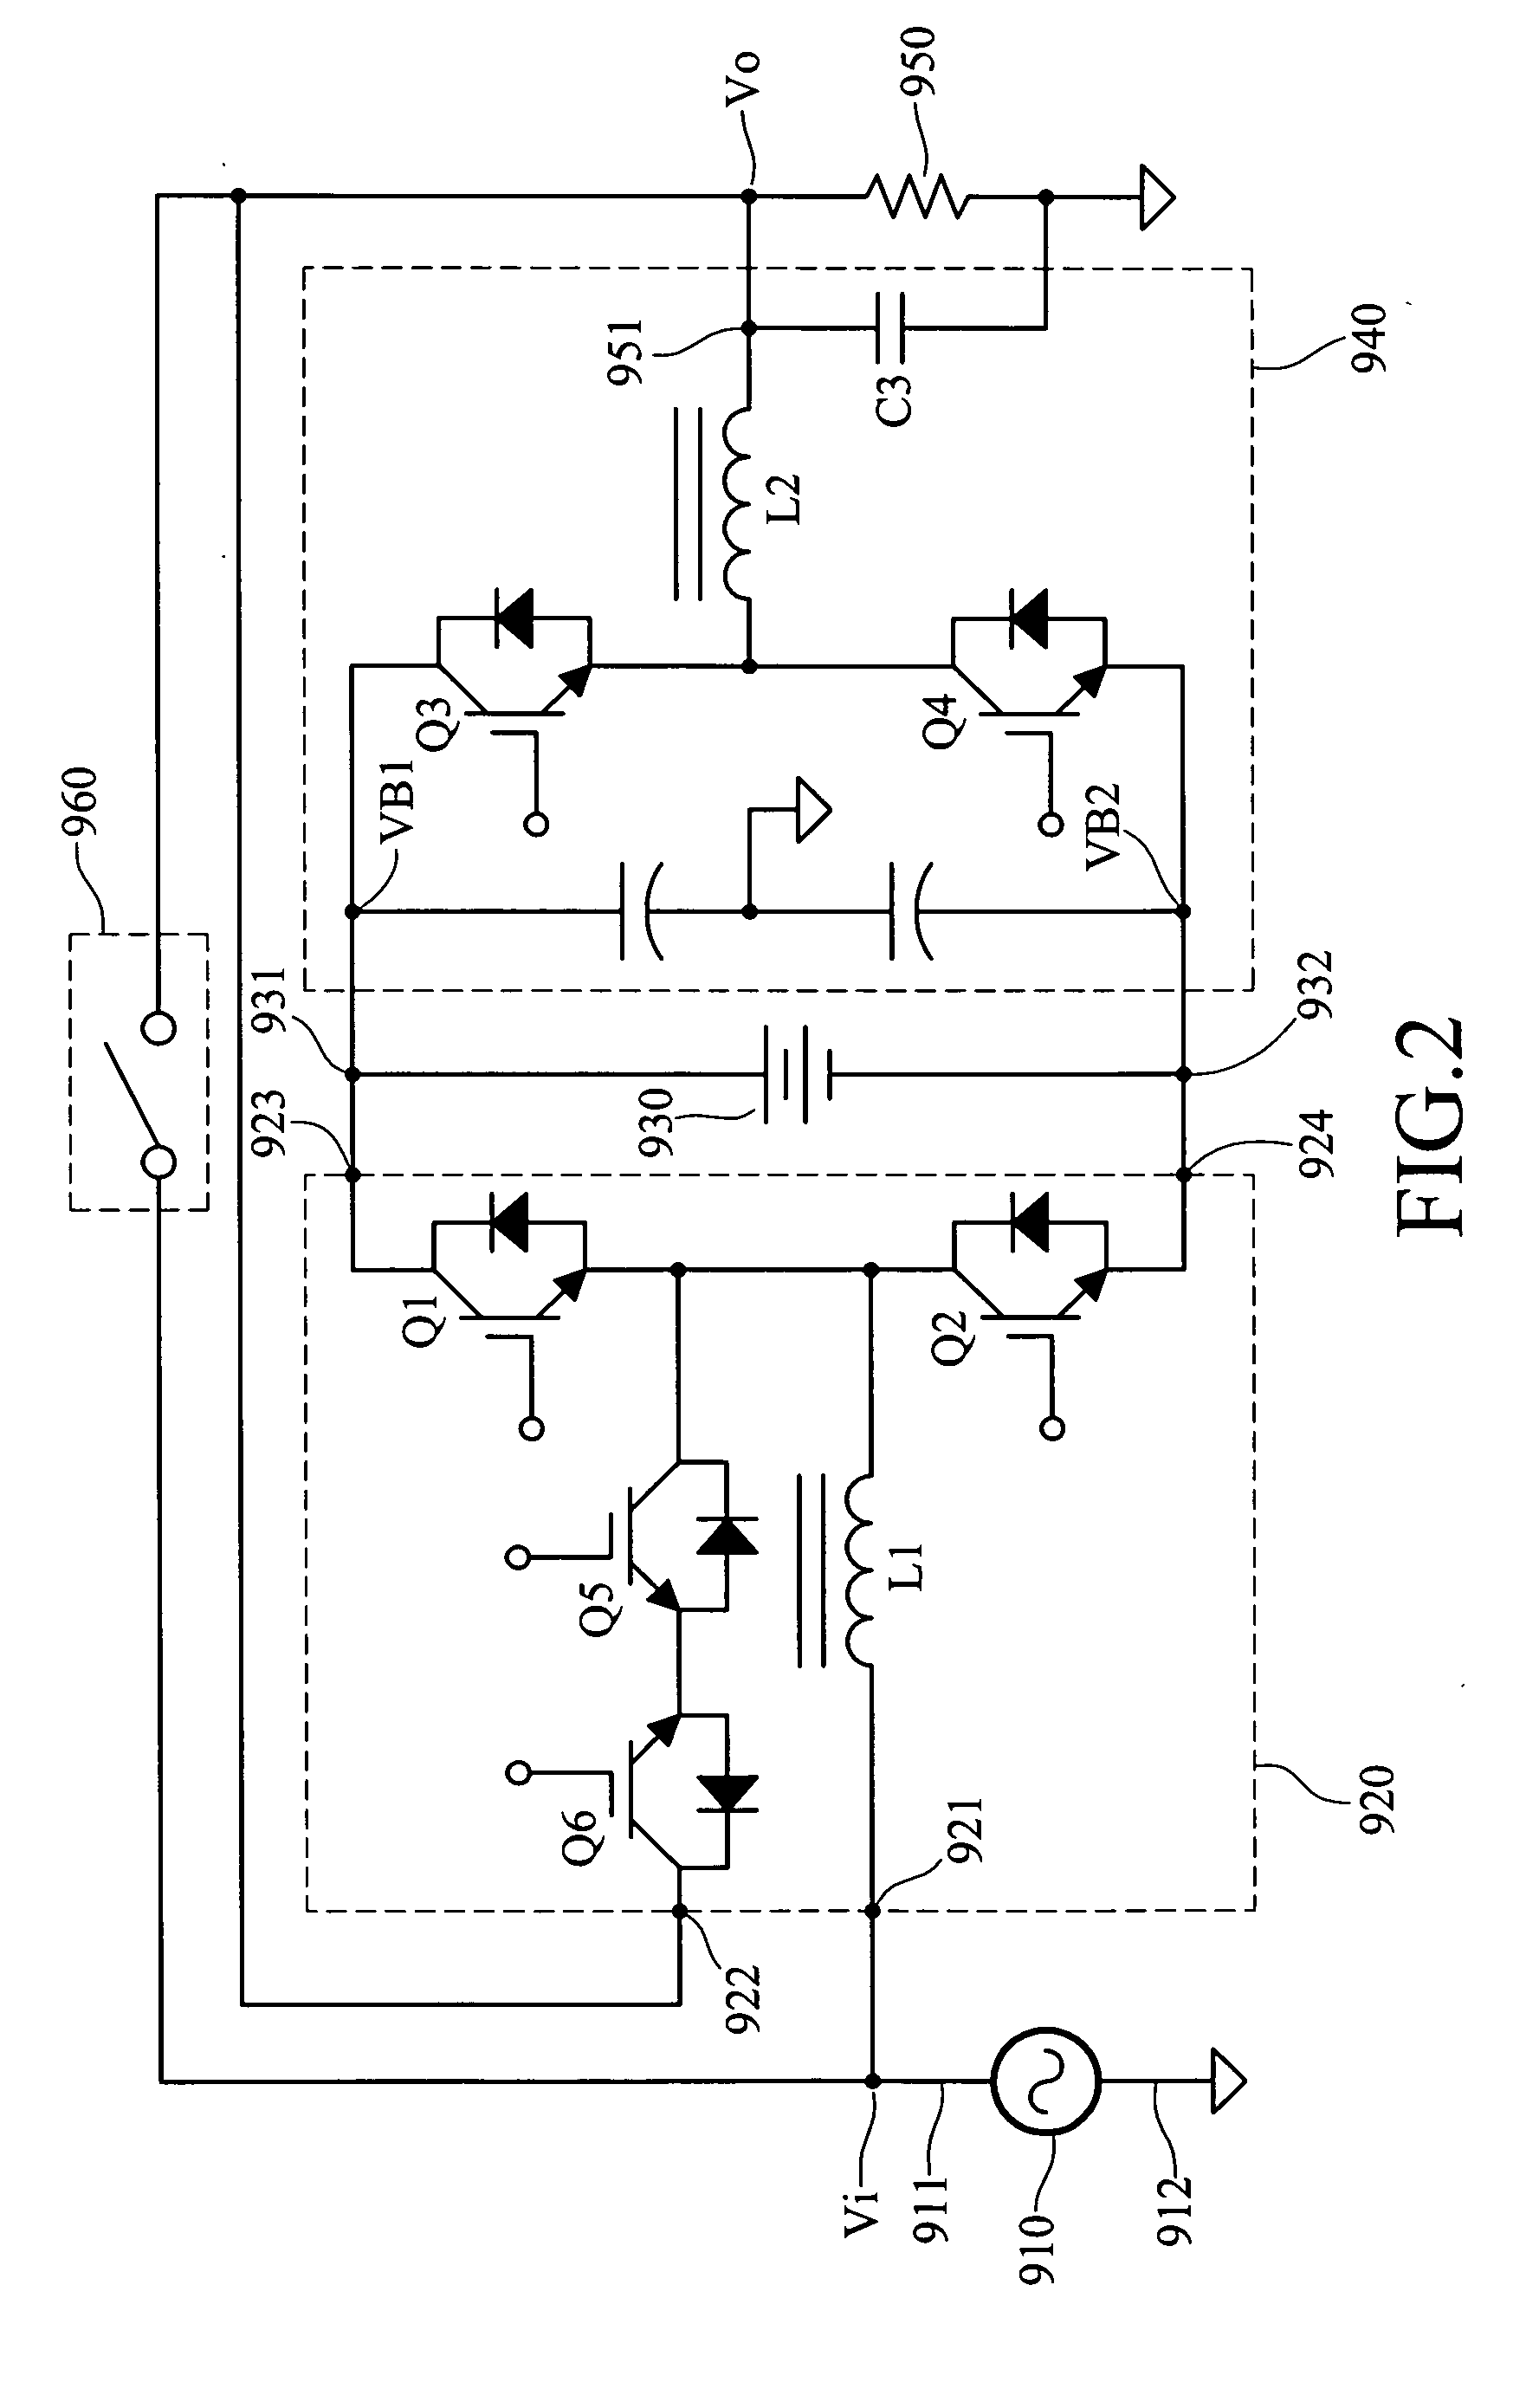 Methods and apparatus providing double conversion/series-parallel hybrid operation in uninterruptible power supplies